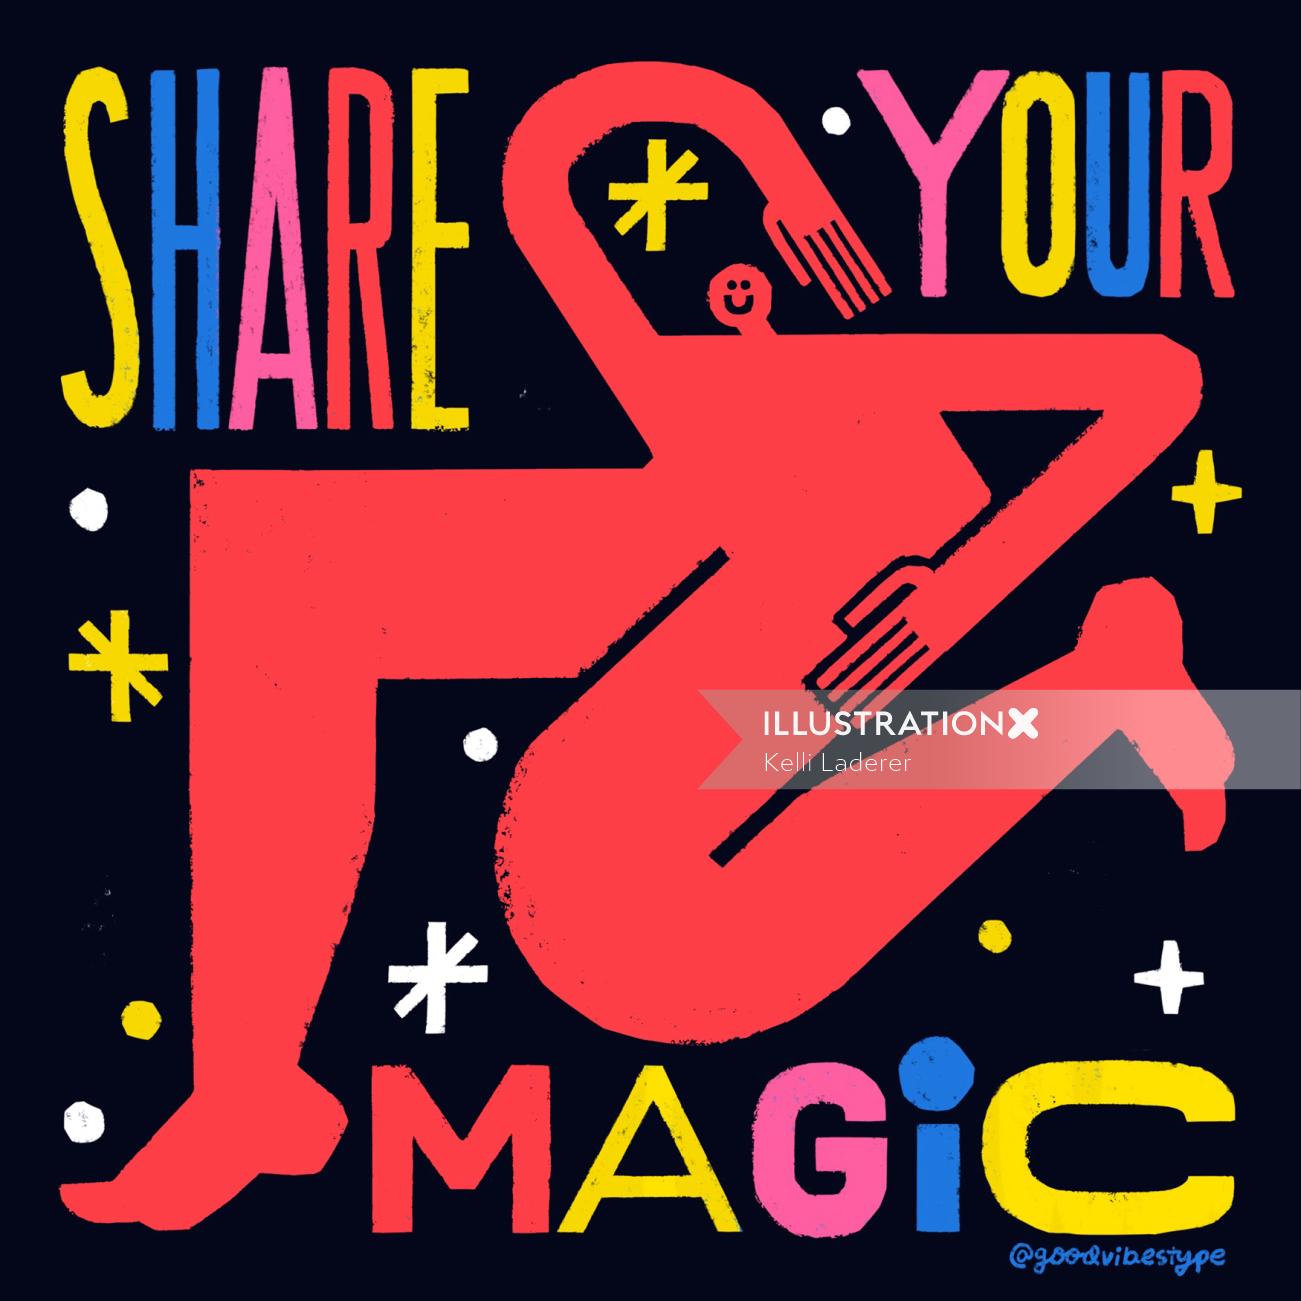 Share your magic 